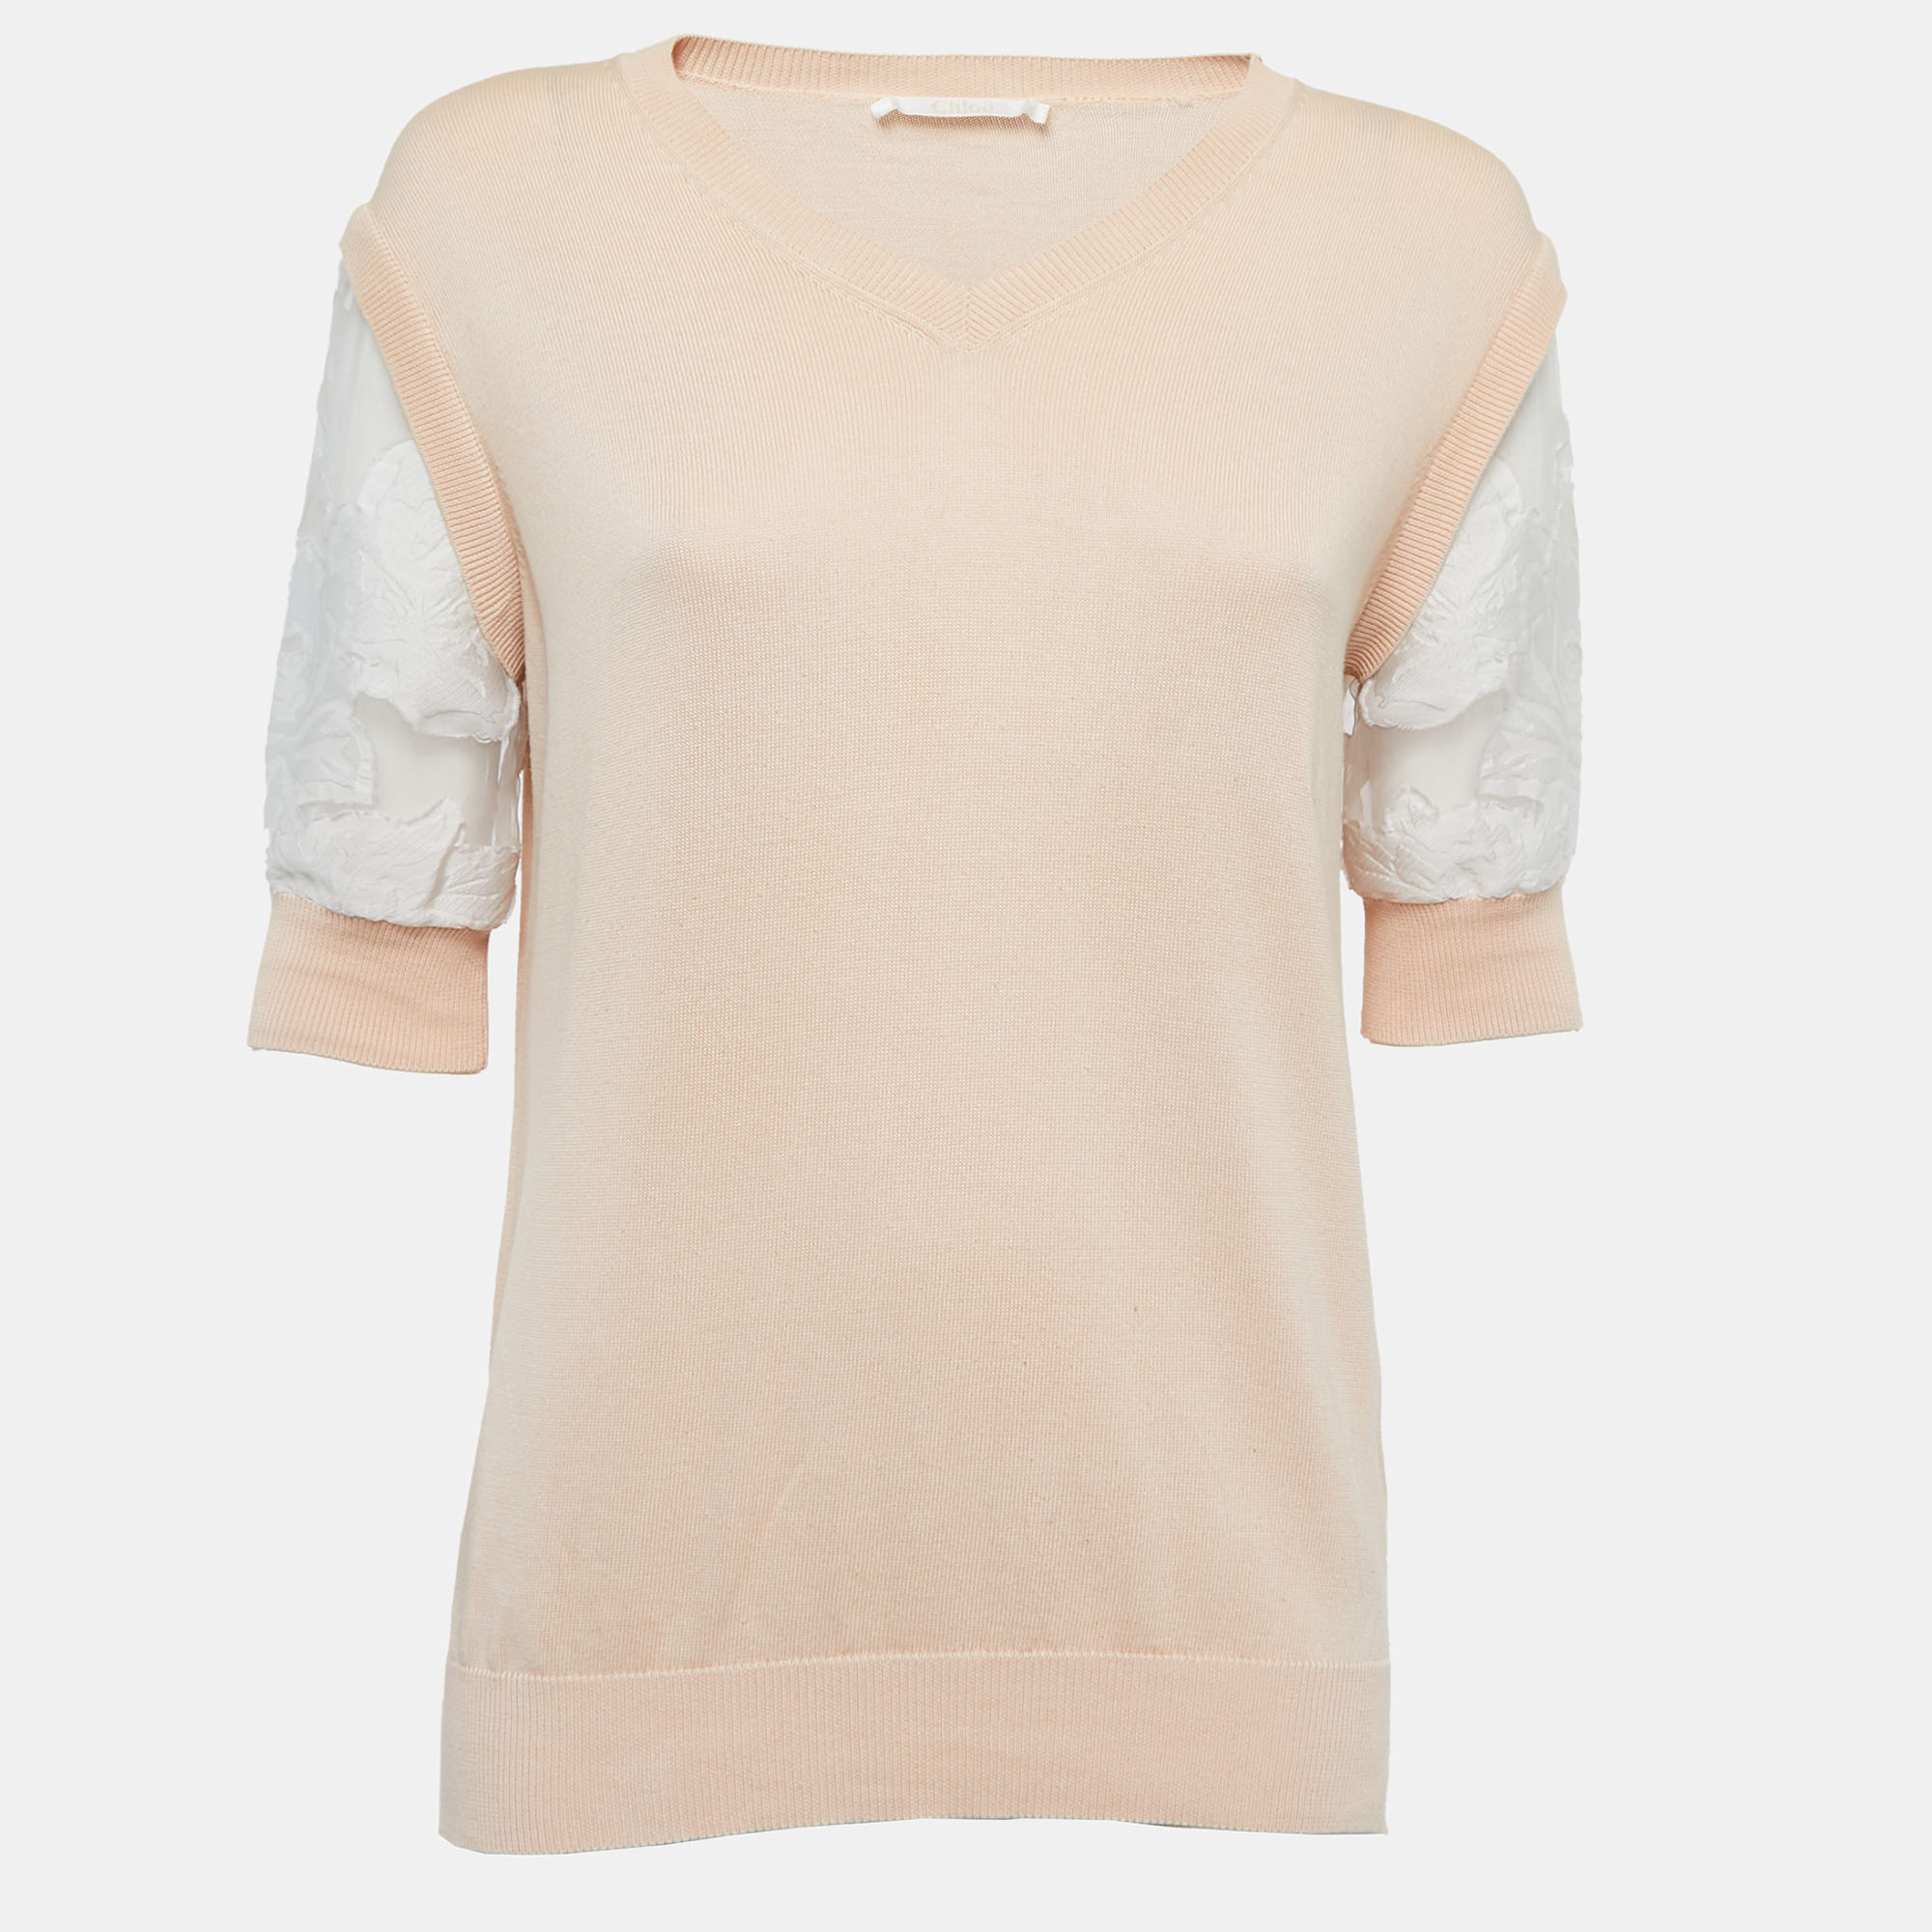 Pre-owned Chloé Beige Cotton Knit Floral Sleeve Detail Top Xs